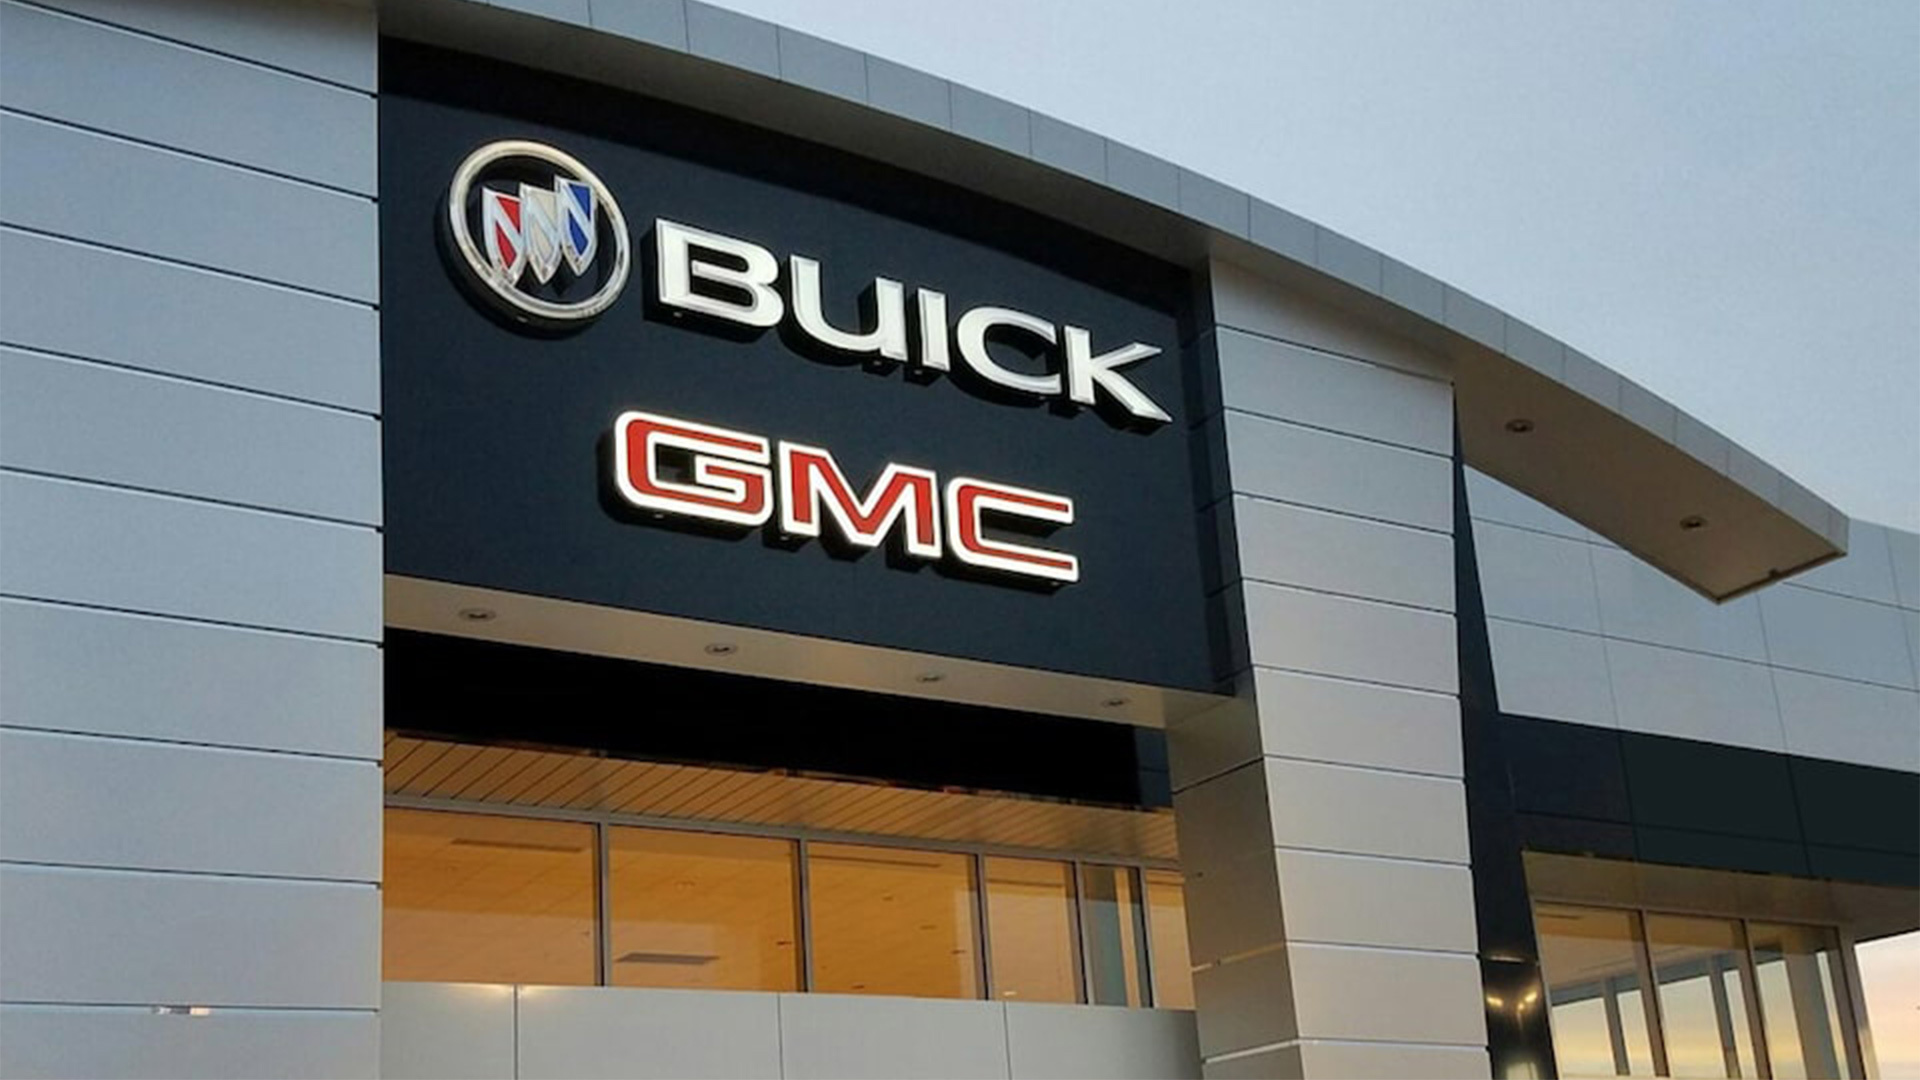 Almost Half Of All U.S. Buick Dealers Accept Buyout Rather Than Making EV Investments